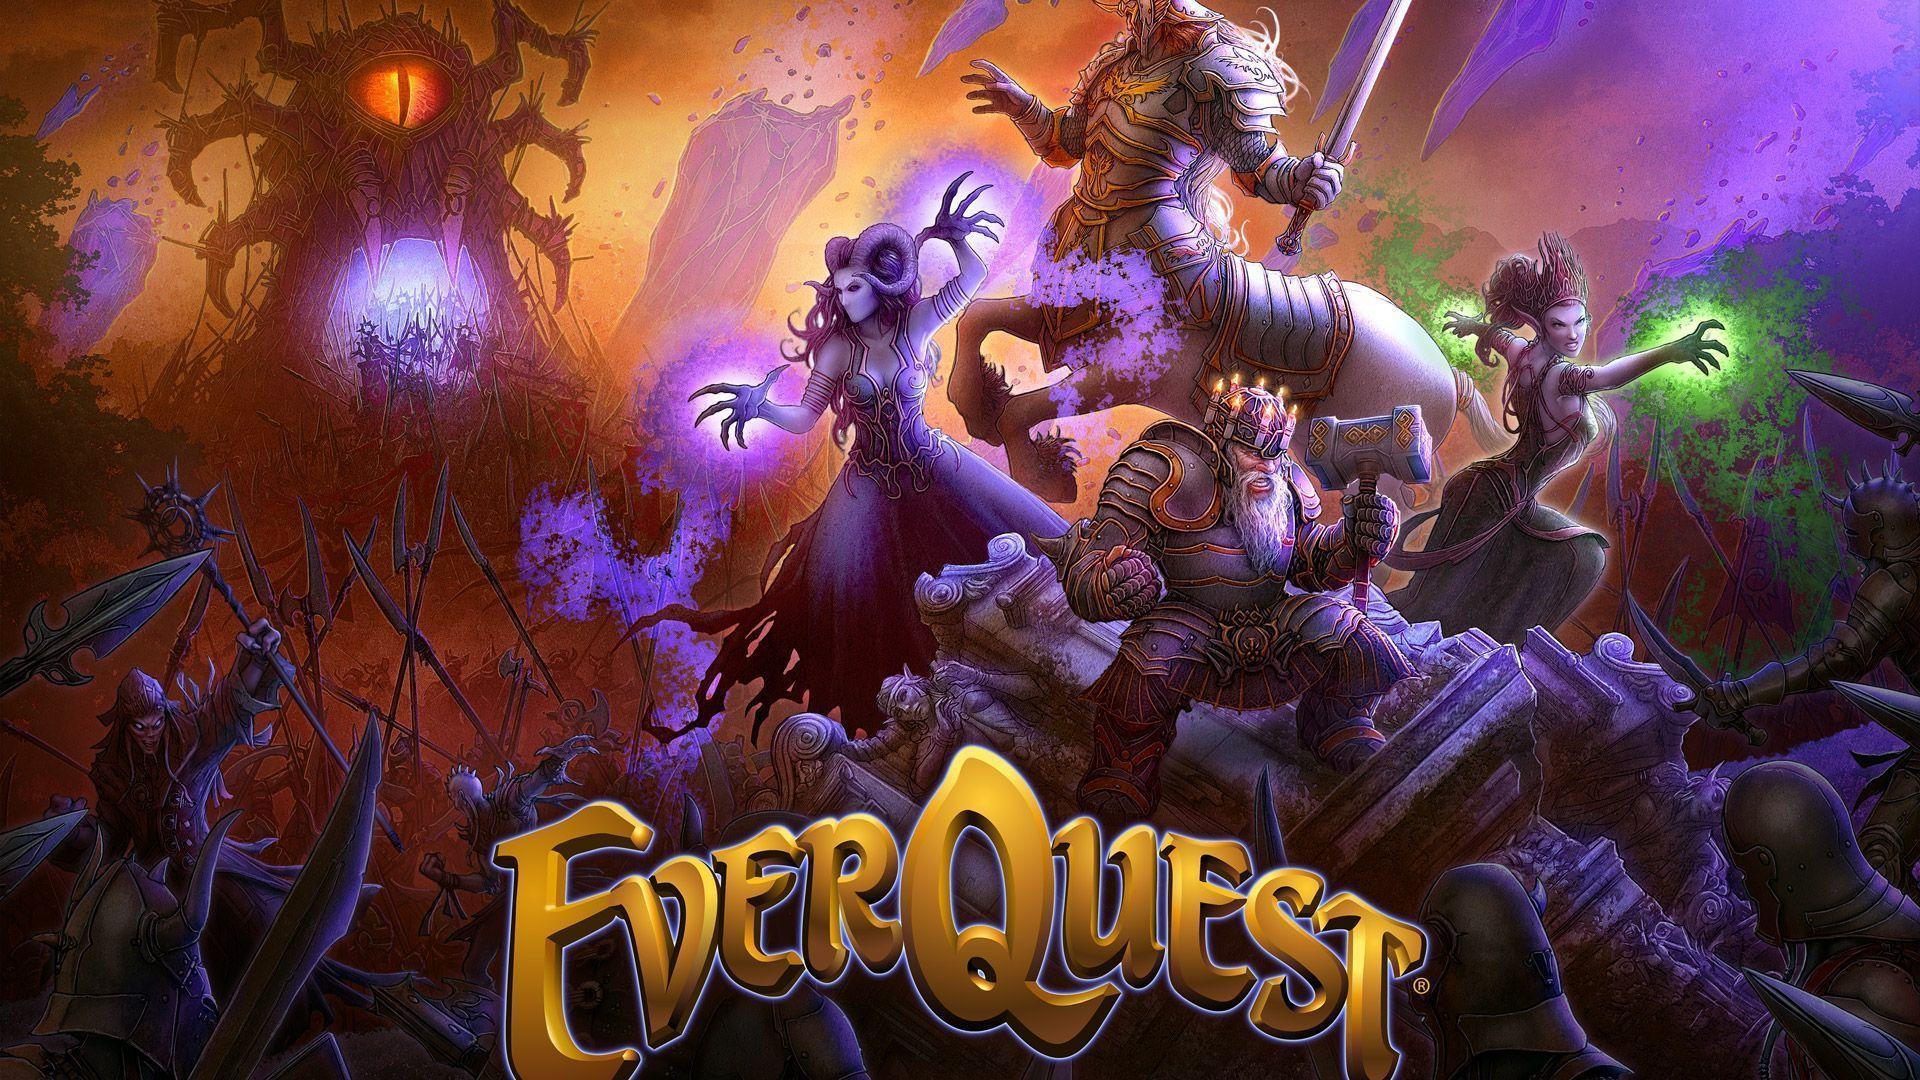 realms of everquest wallpapers.